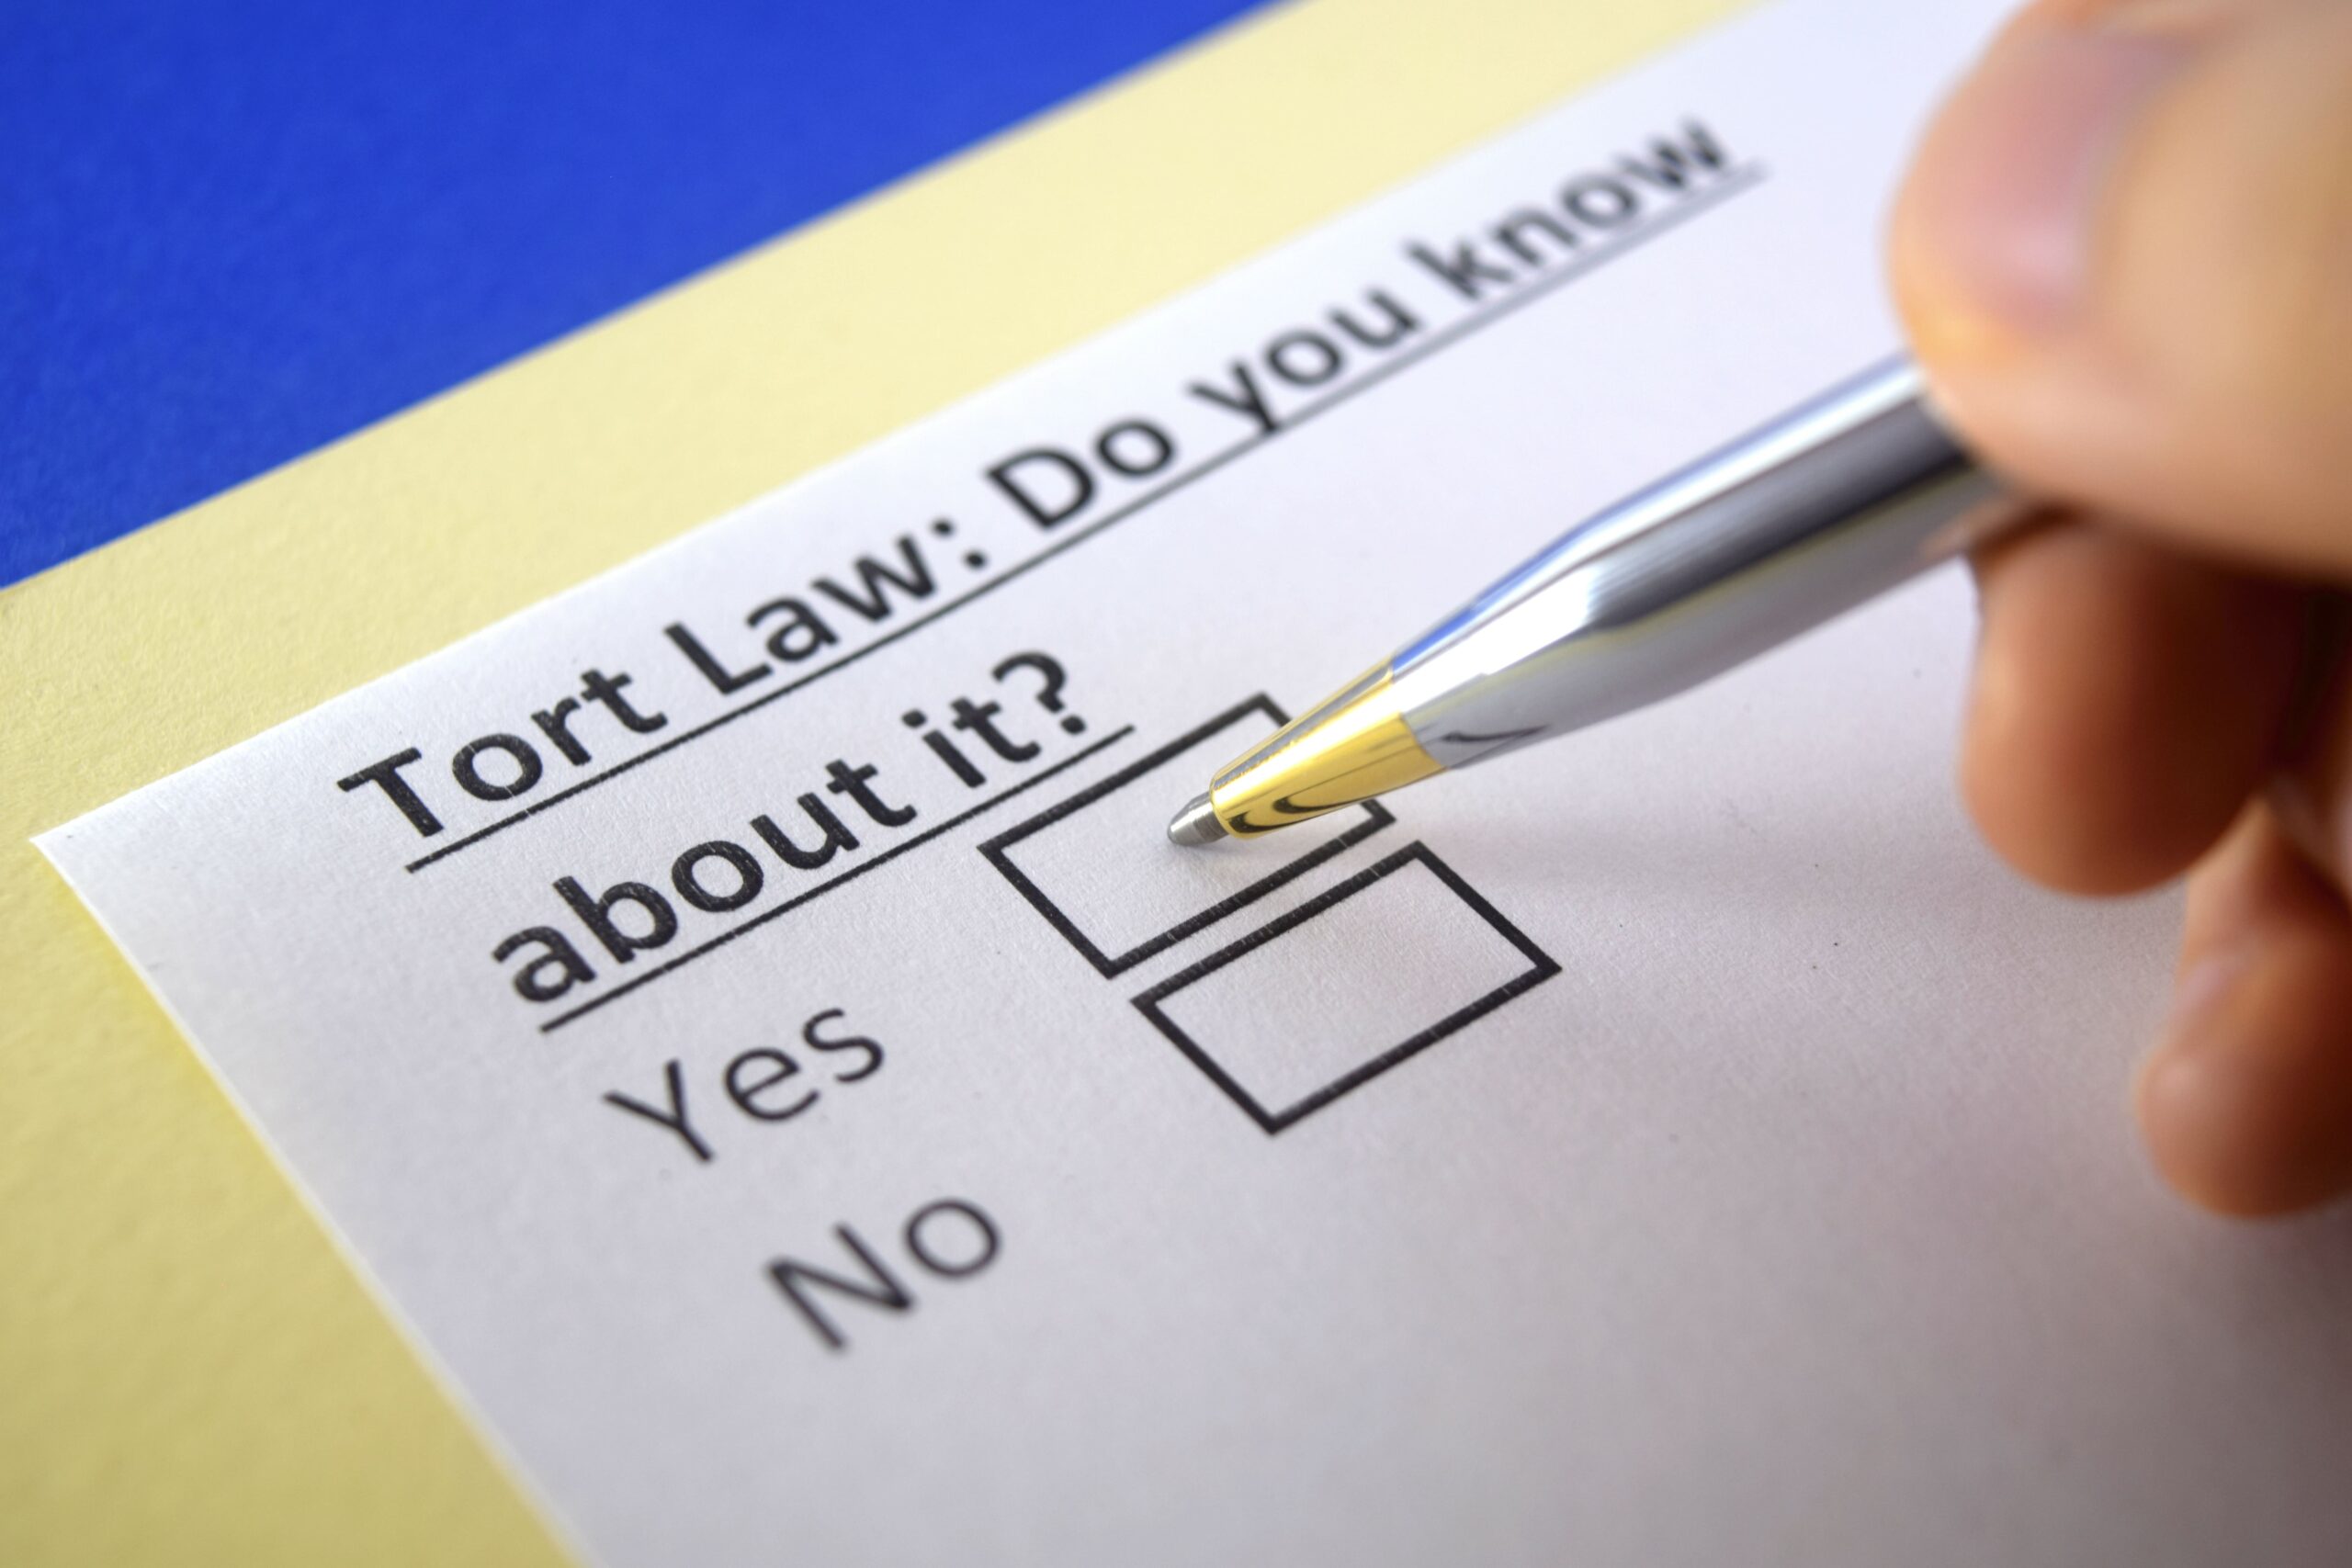 What Is a Tort Reform and Why Does It Matter?